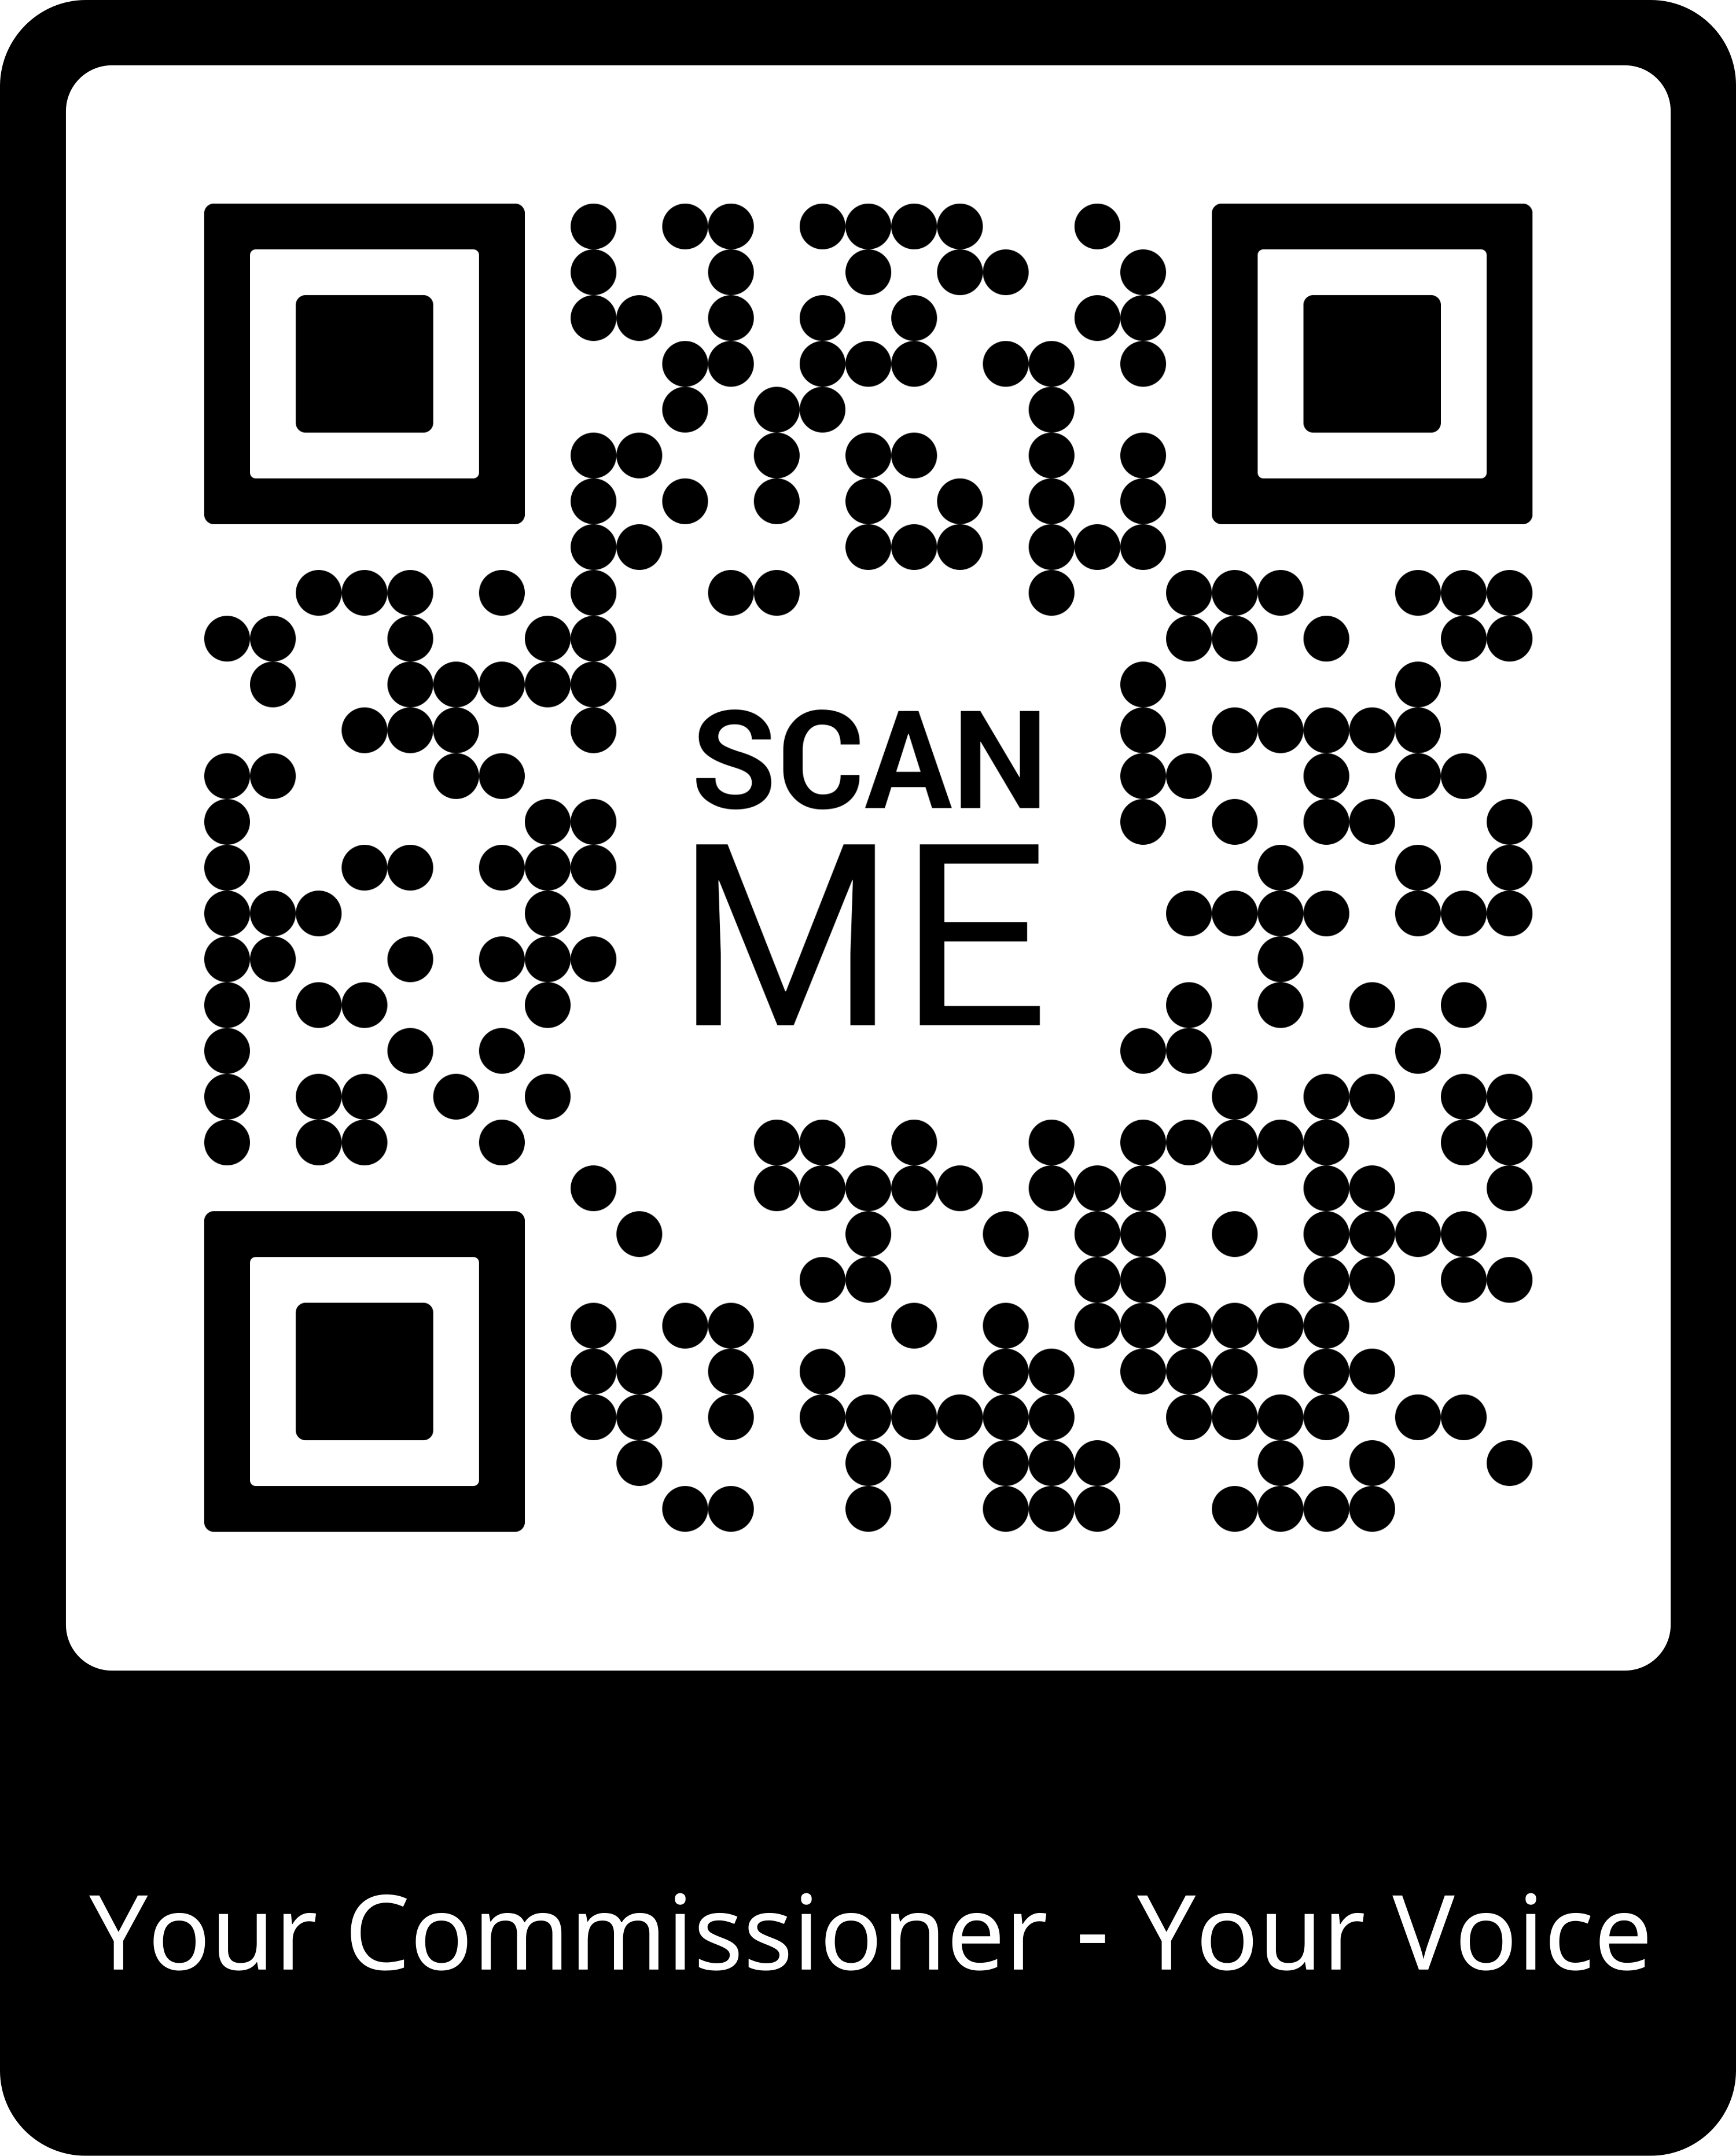 Scan the QR code - Your Commissioner - Your Voice